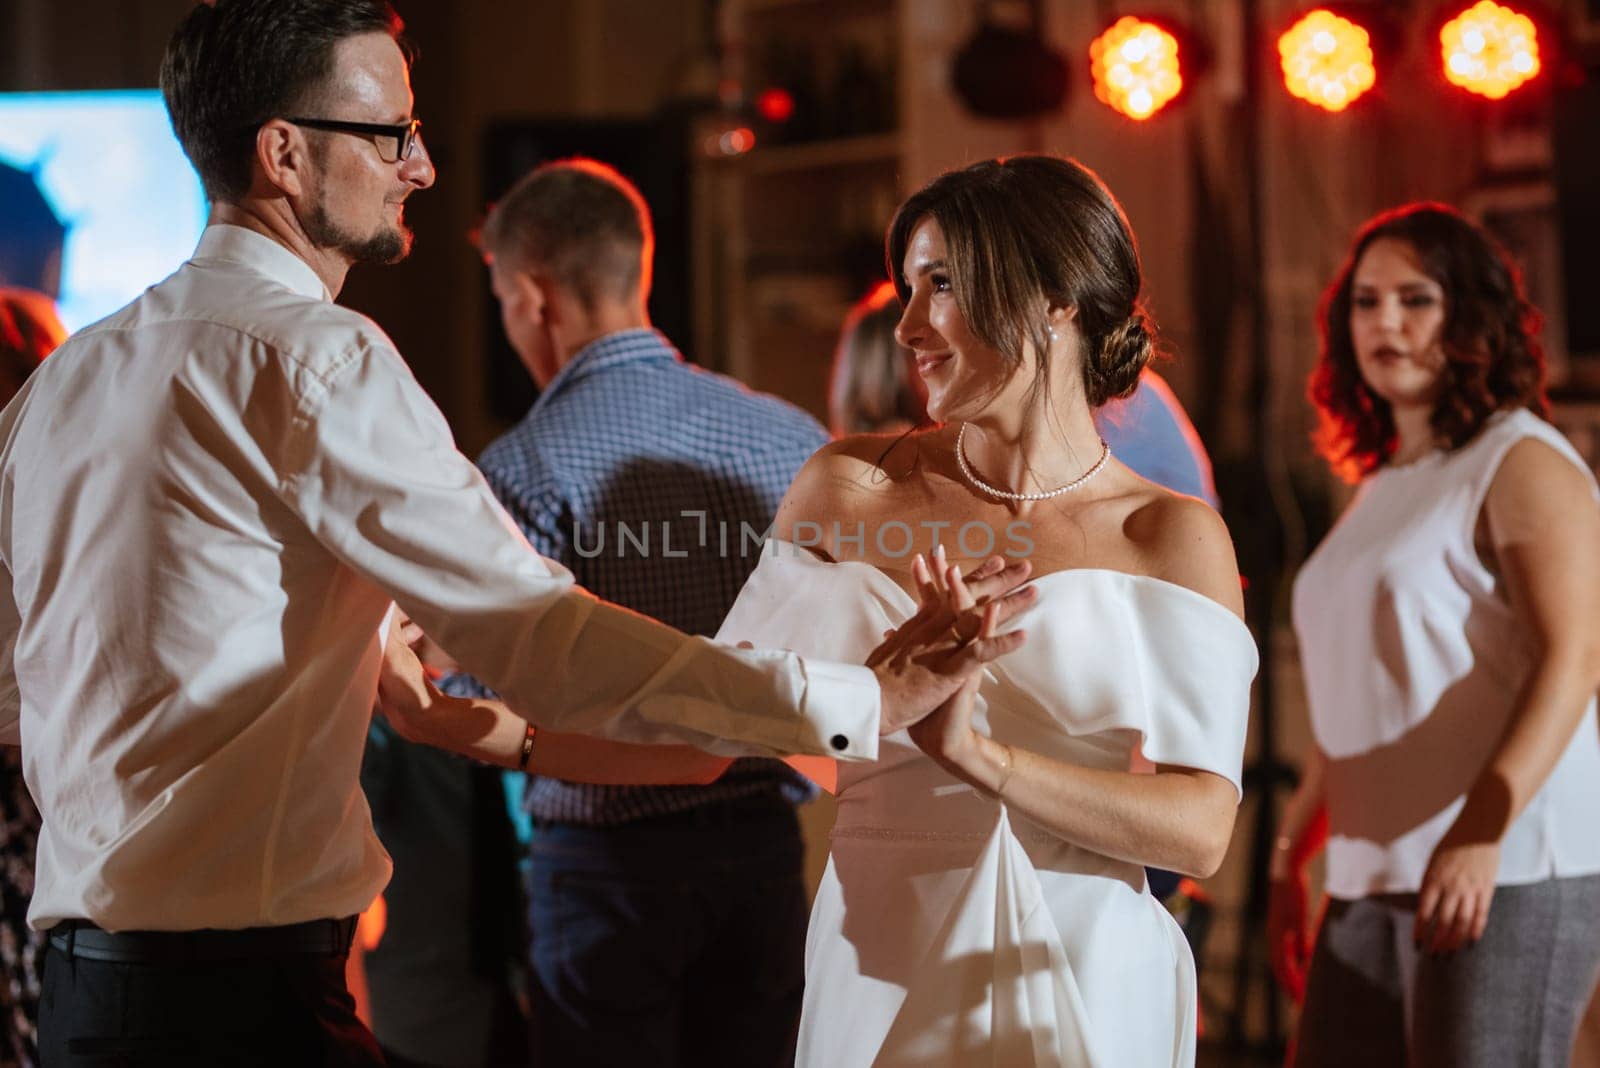 the first dance of the bride and groom inside a restaurant by Andreua